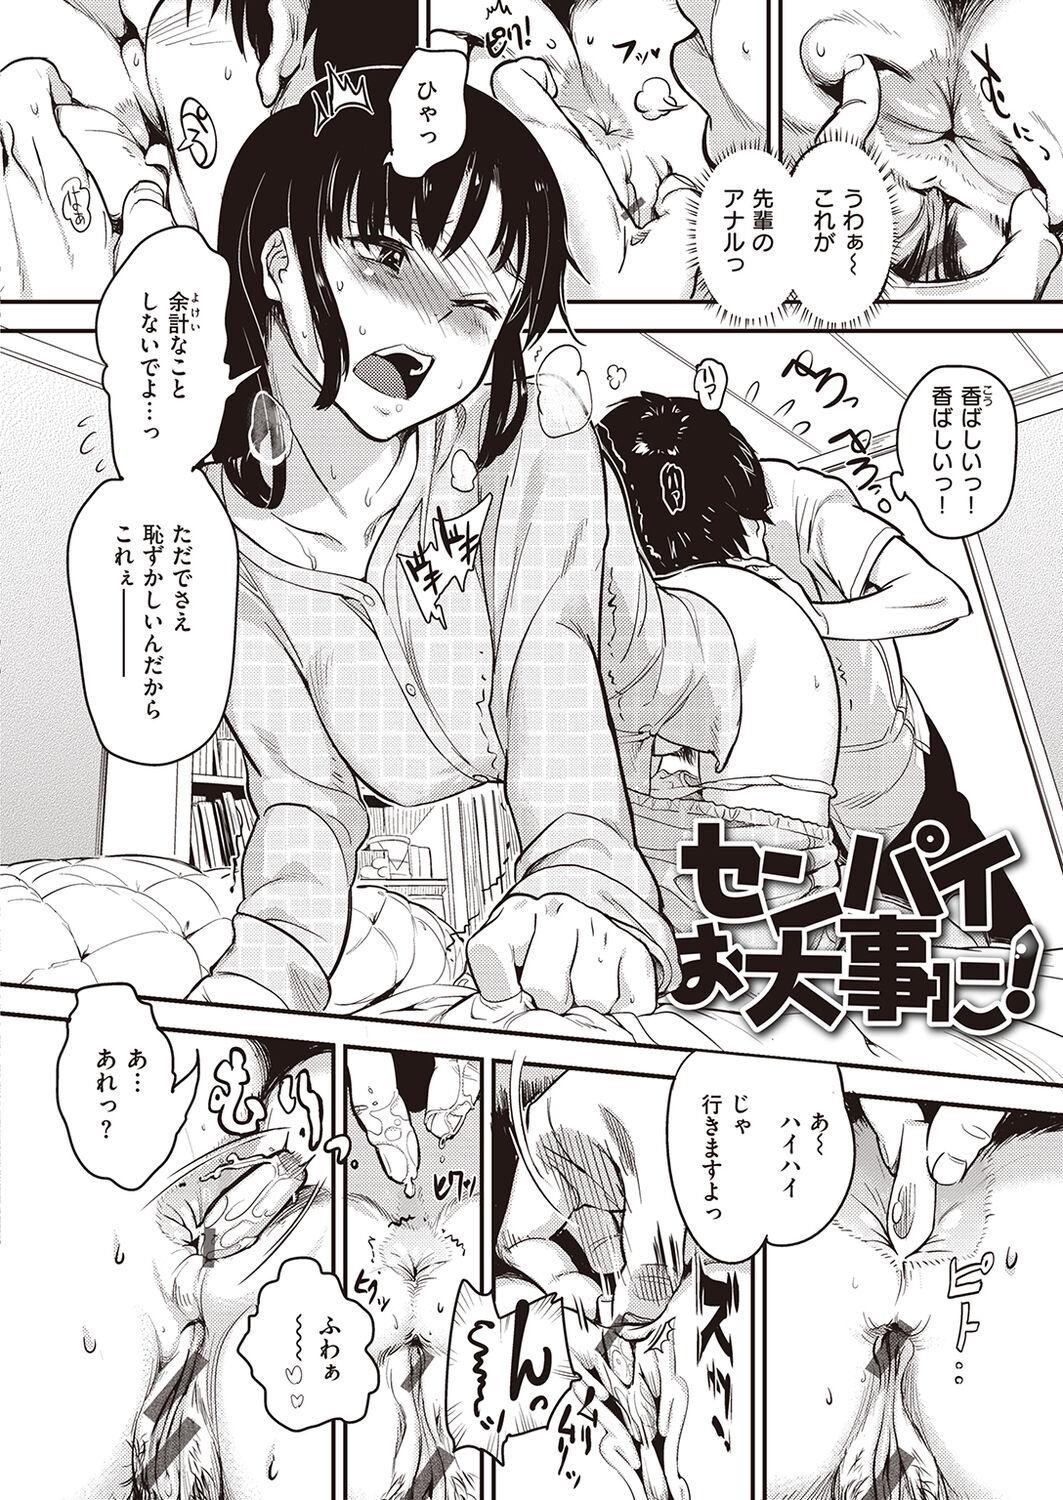 Tranny Sex Oppai Canvas Officesex - Page 4